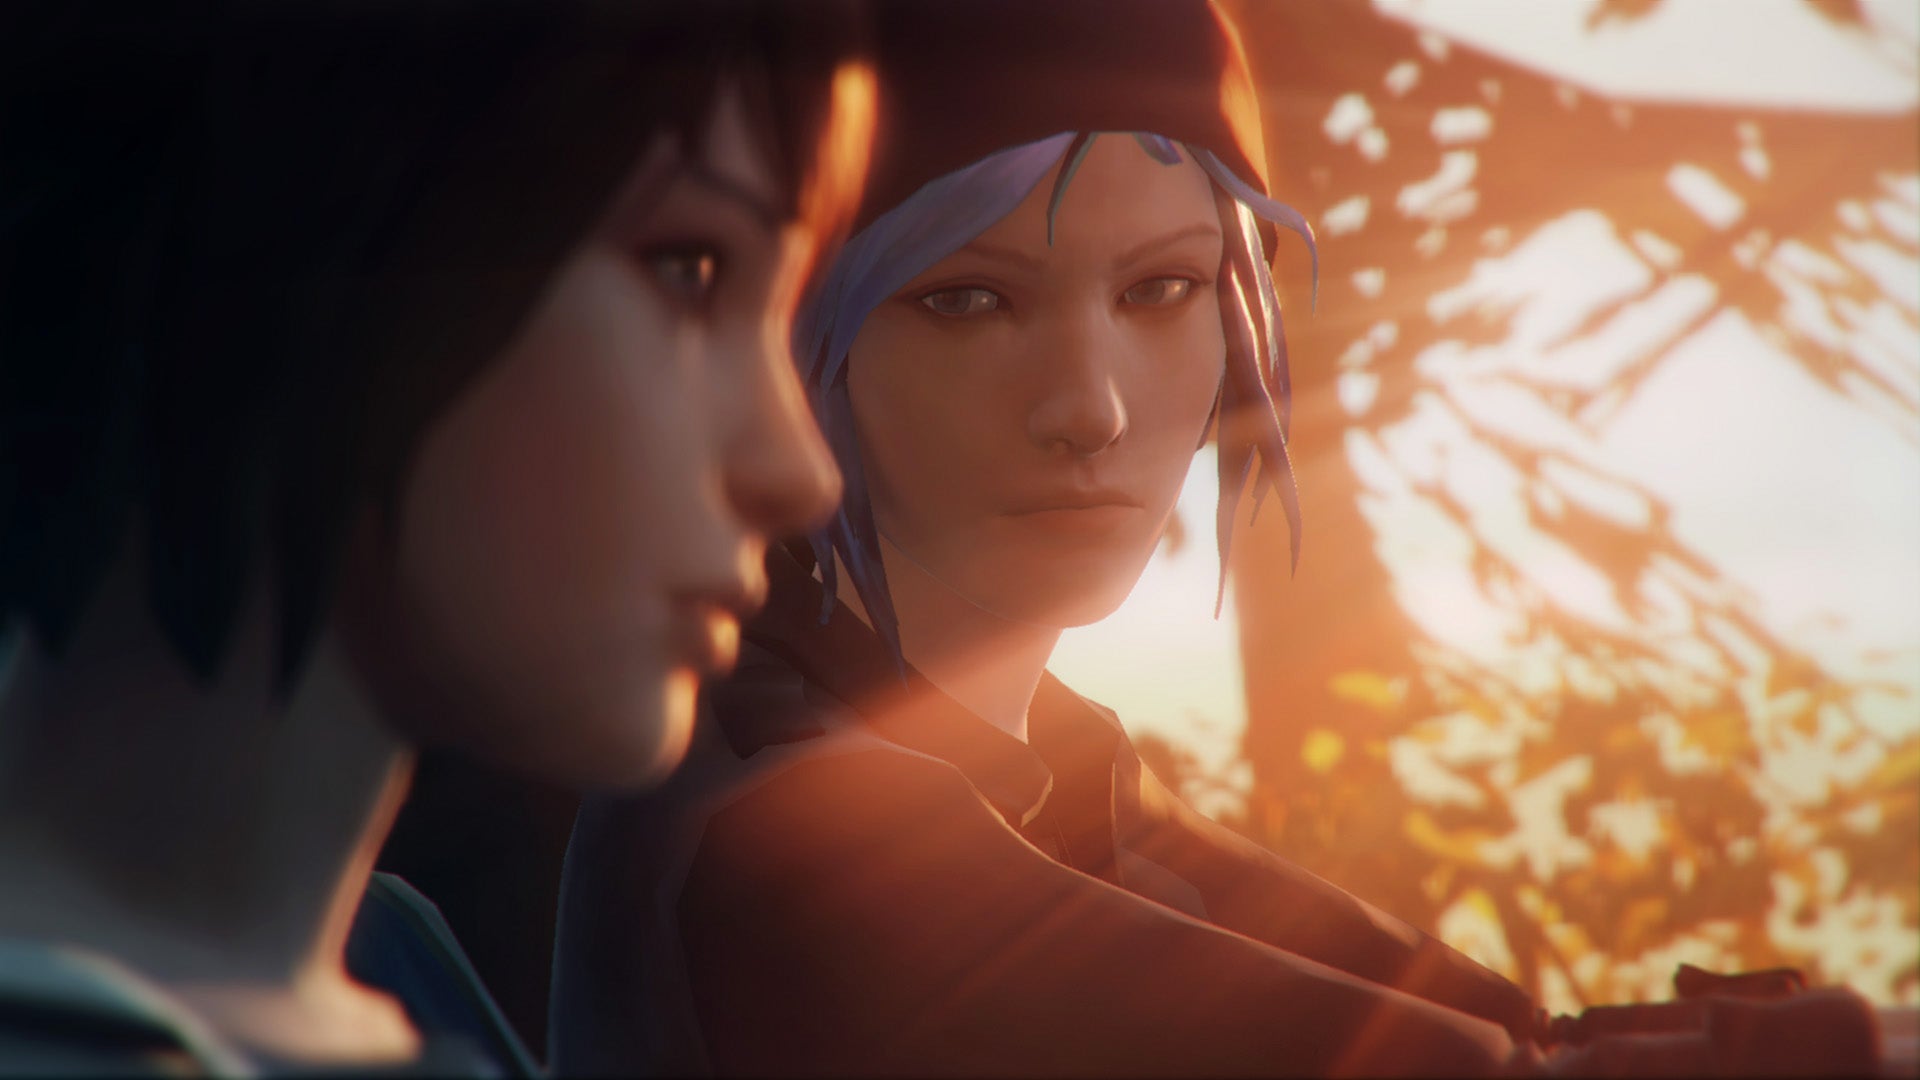 Image for Life is Strange 2 is happening says Dontnod Entertainment